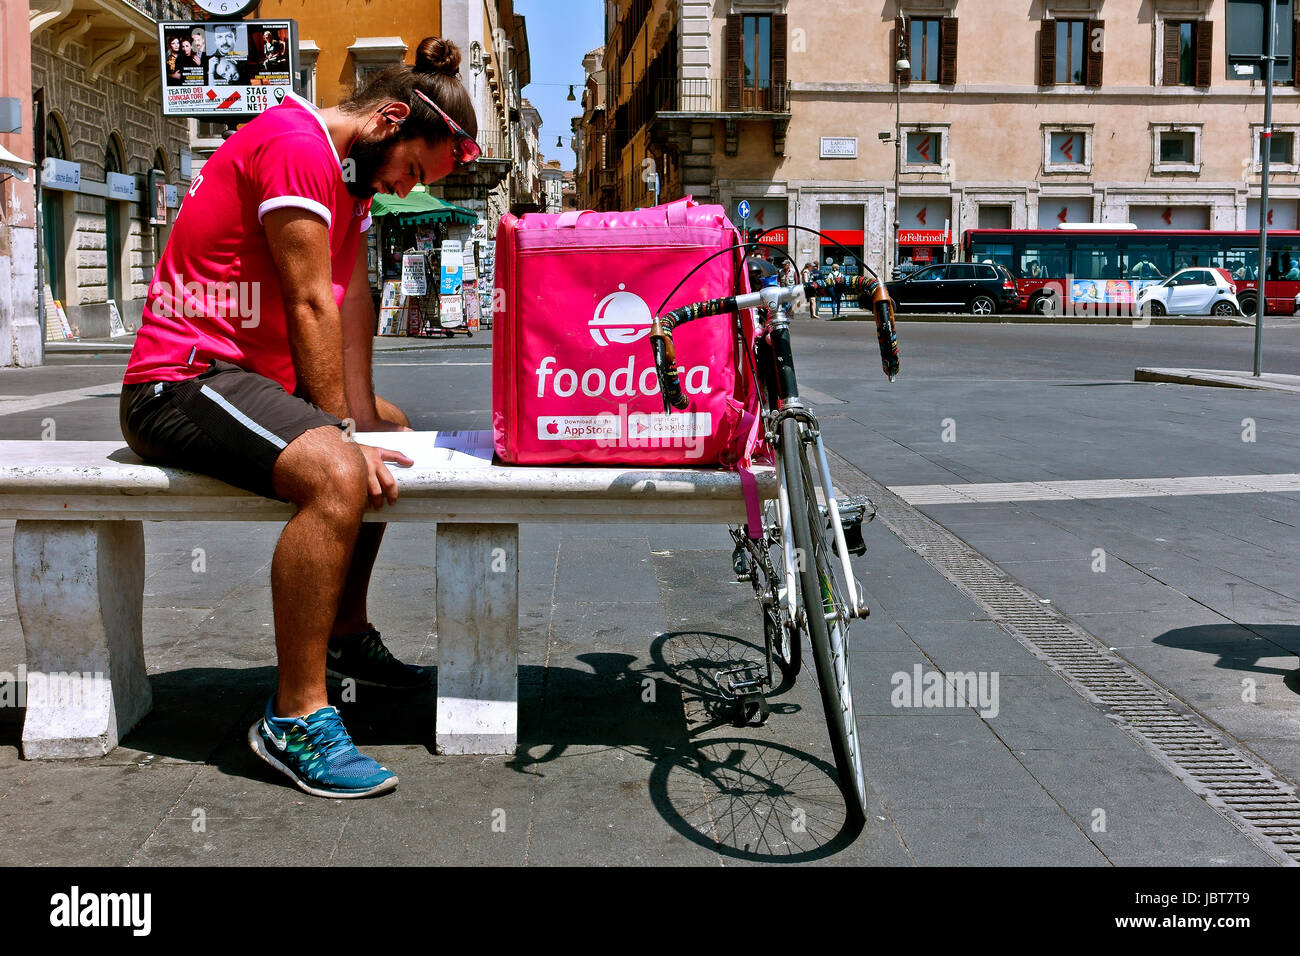 Delivery boy wearing a pink tshirt, resting on a bench and studying while waiting for a delivery request call. Pink delivery courier box. Rome, Italy Stock Photo